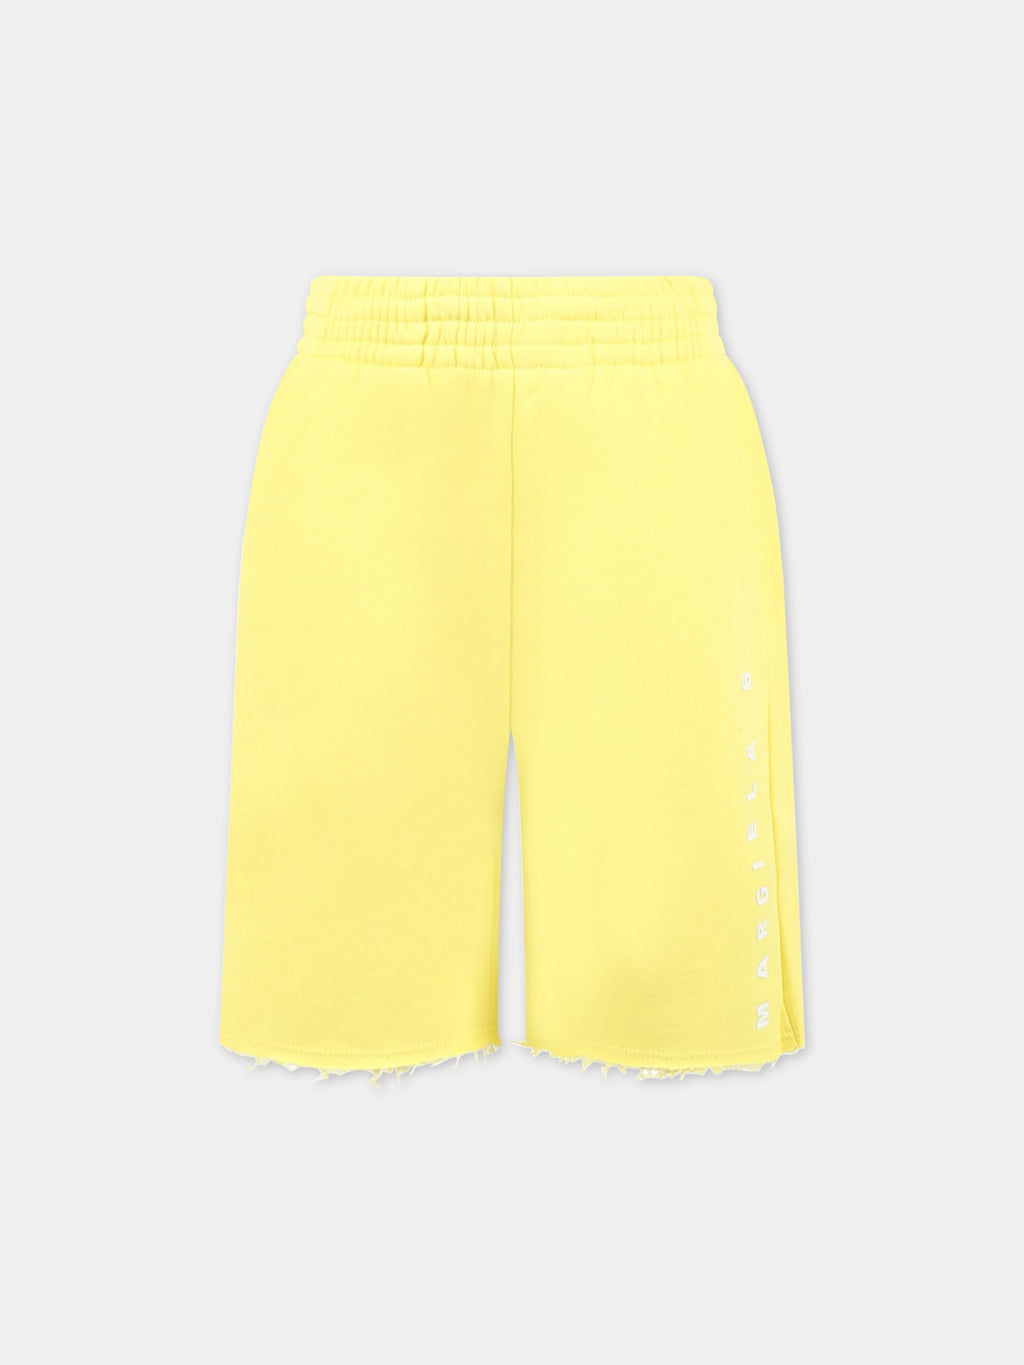 Yellow shorts for kids with white logo